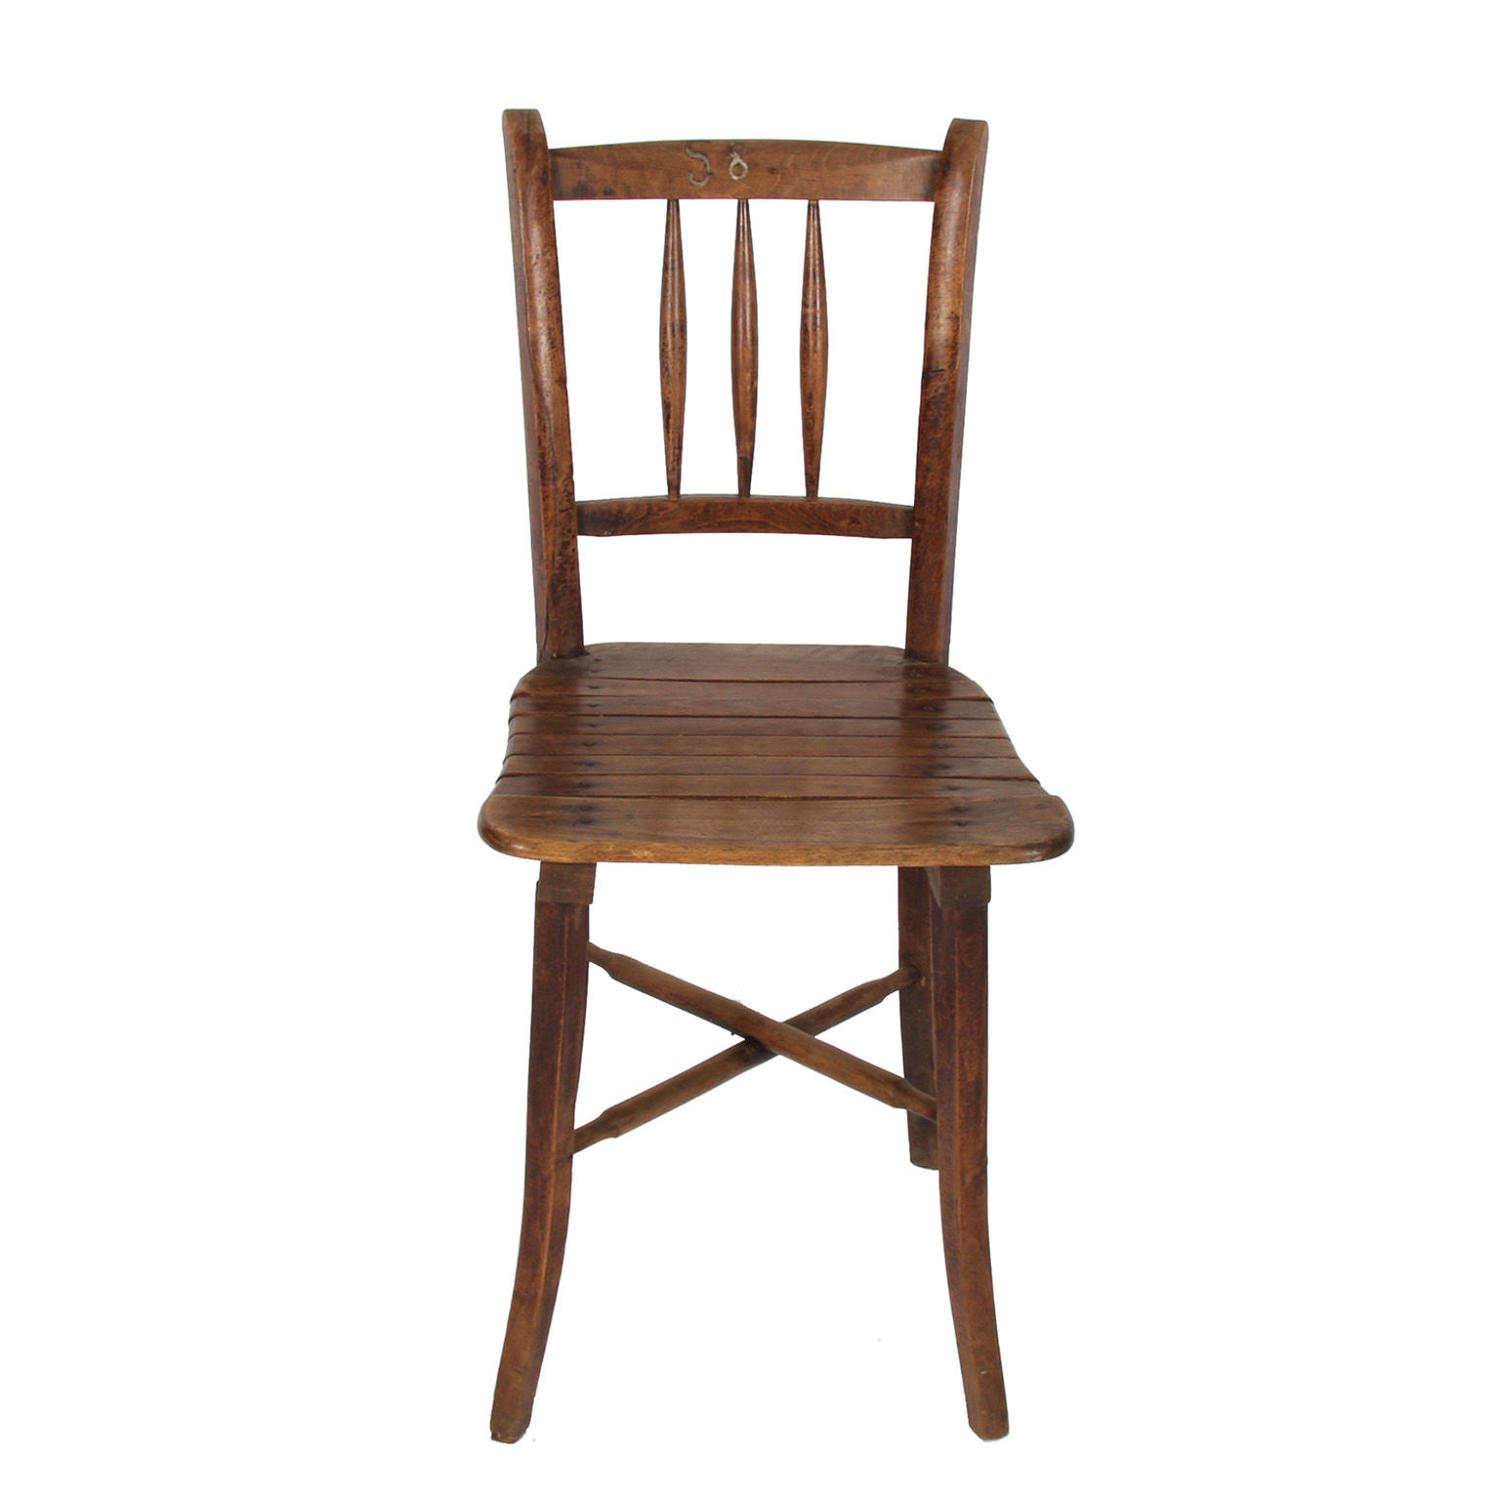 Single Wooden Chair